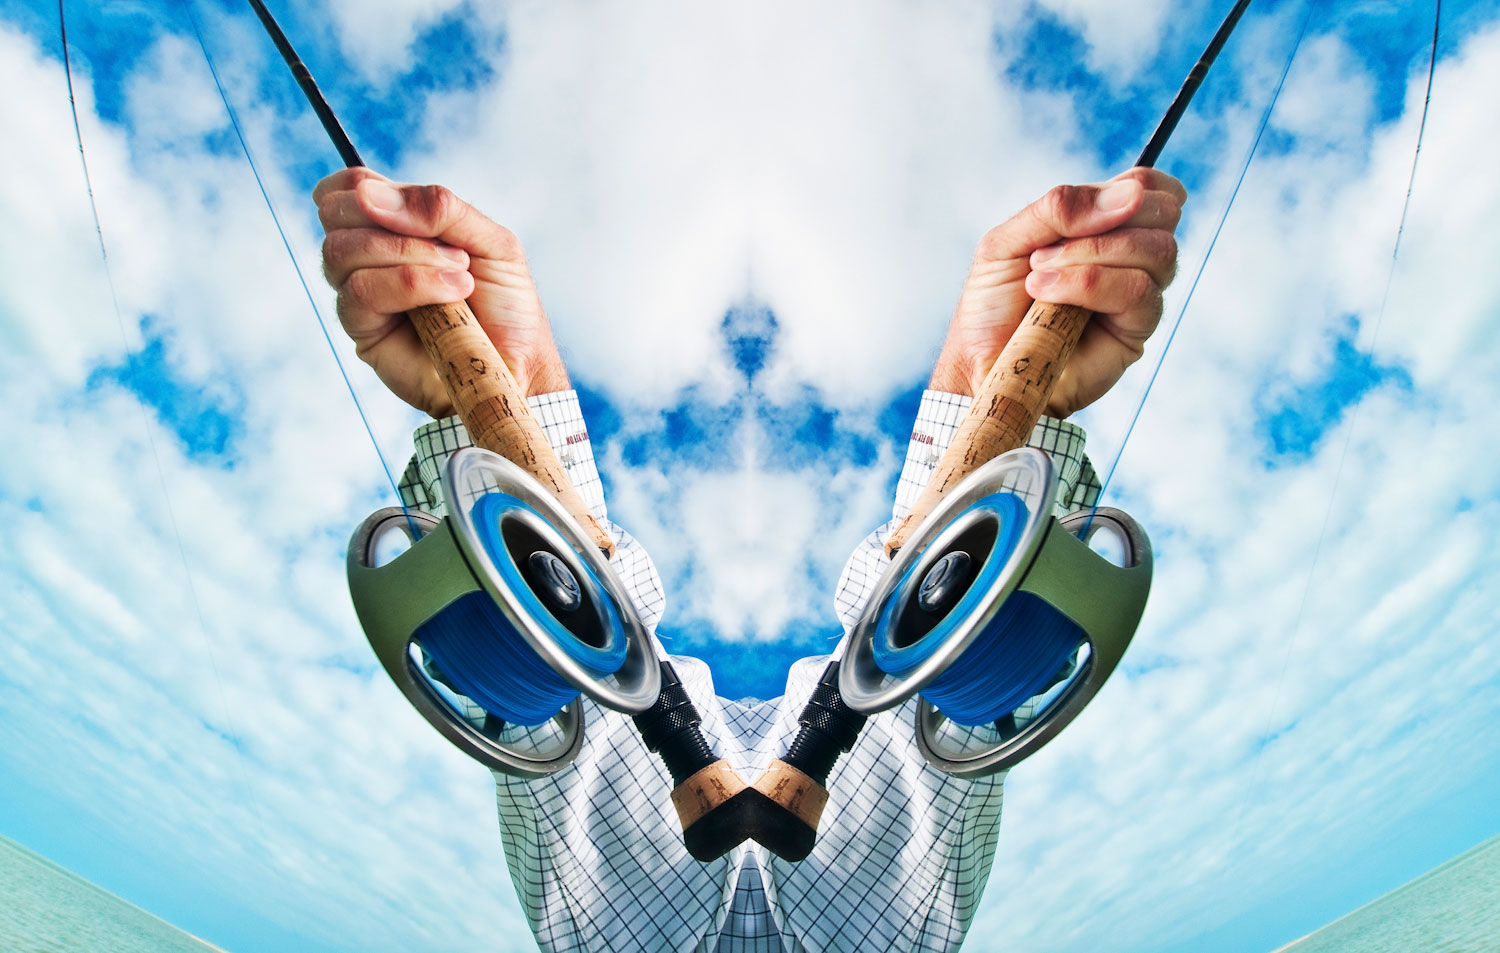 What's Correct, Left or Right Hand Retreive? - Fly Fishing